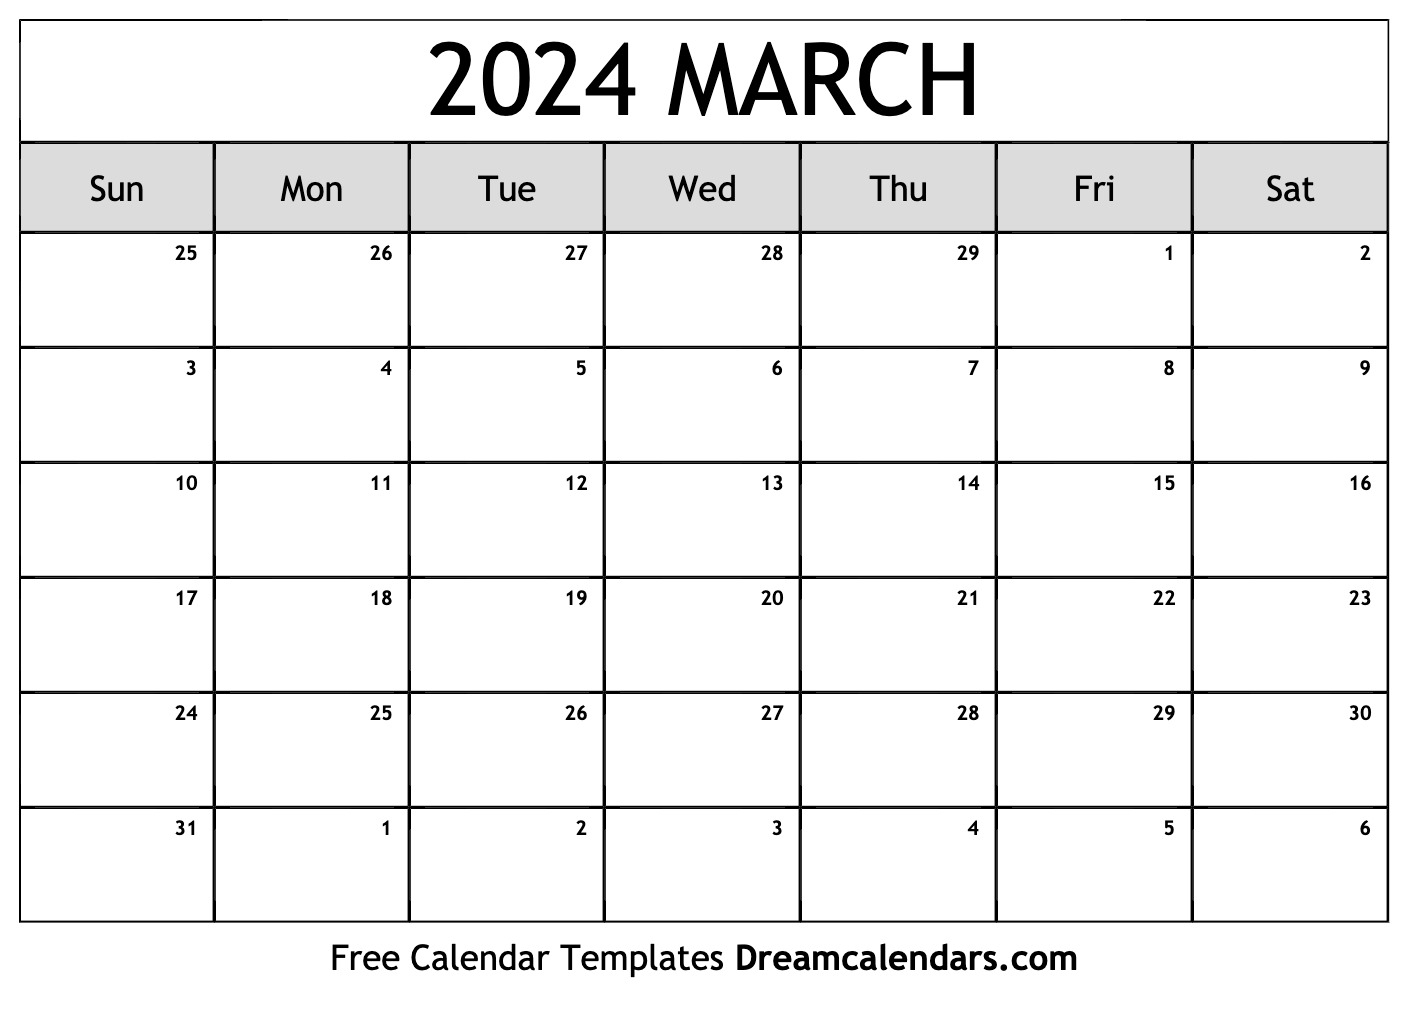 March 2024 Calendar | Free Blank Printable With Holidays for Printable Blank March 2024 Calendar